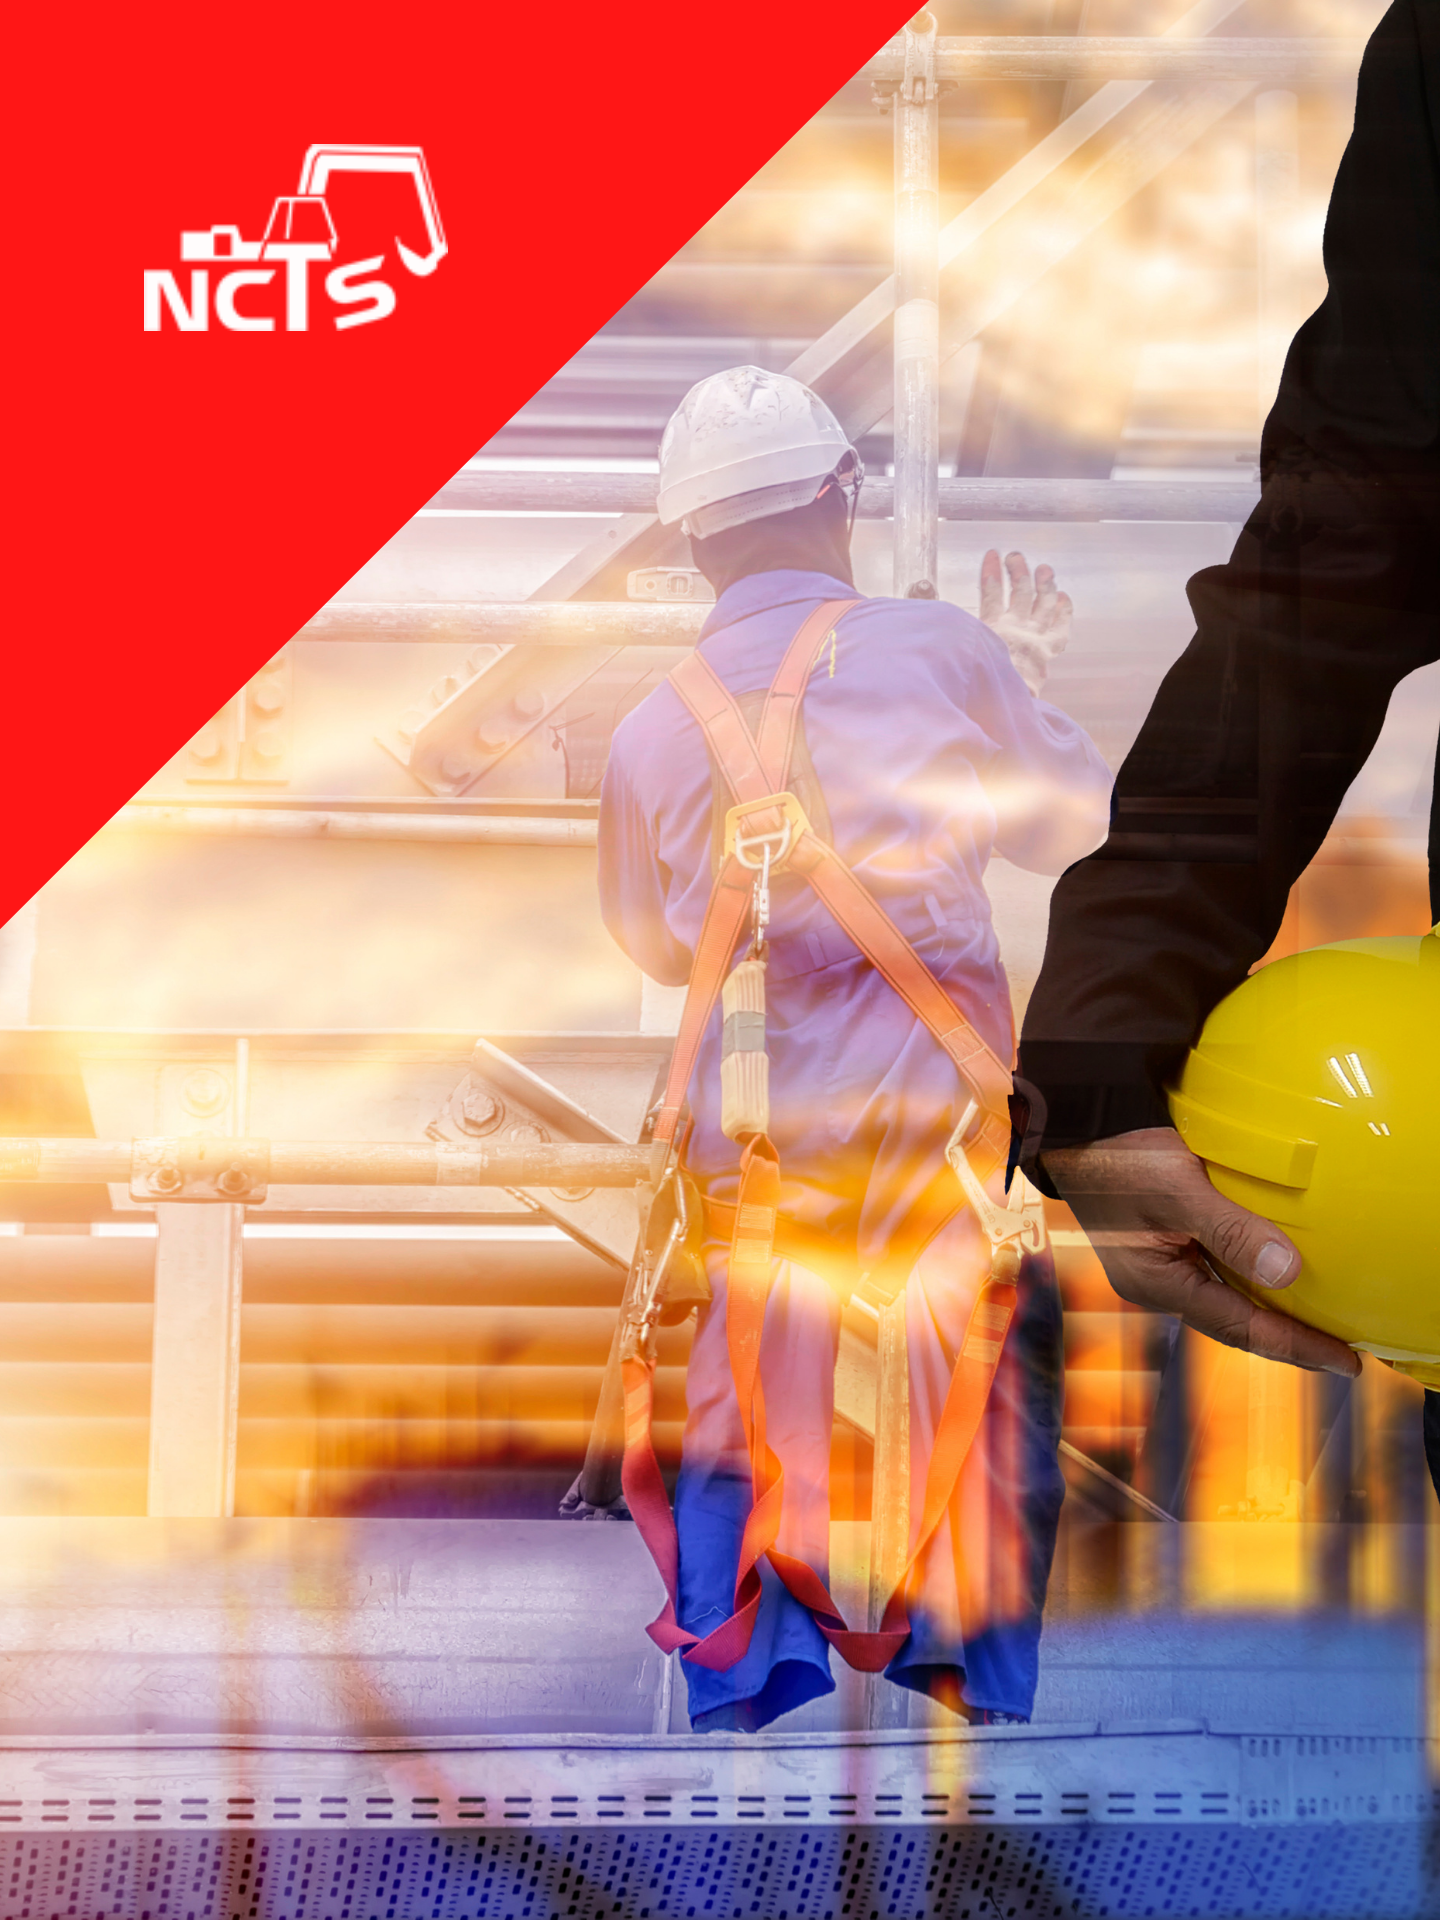 NCTS fire safety